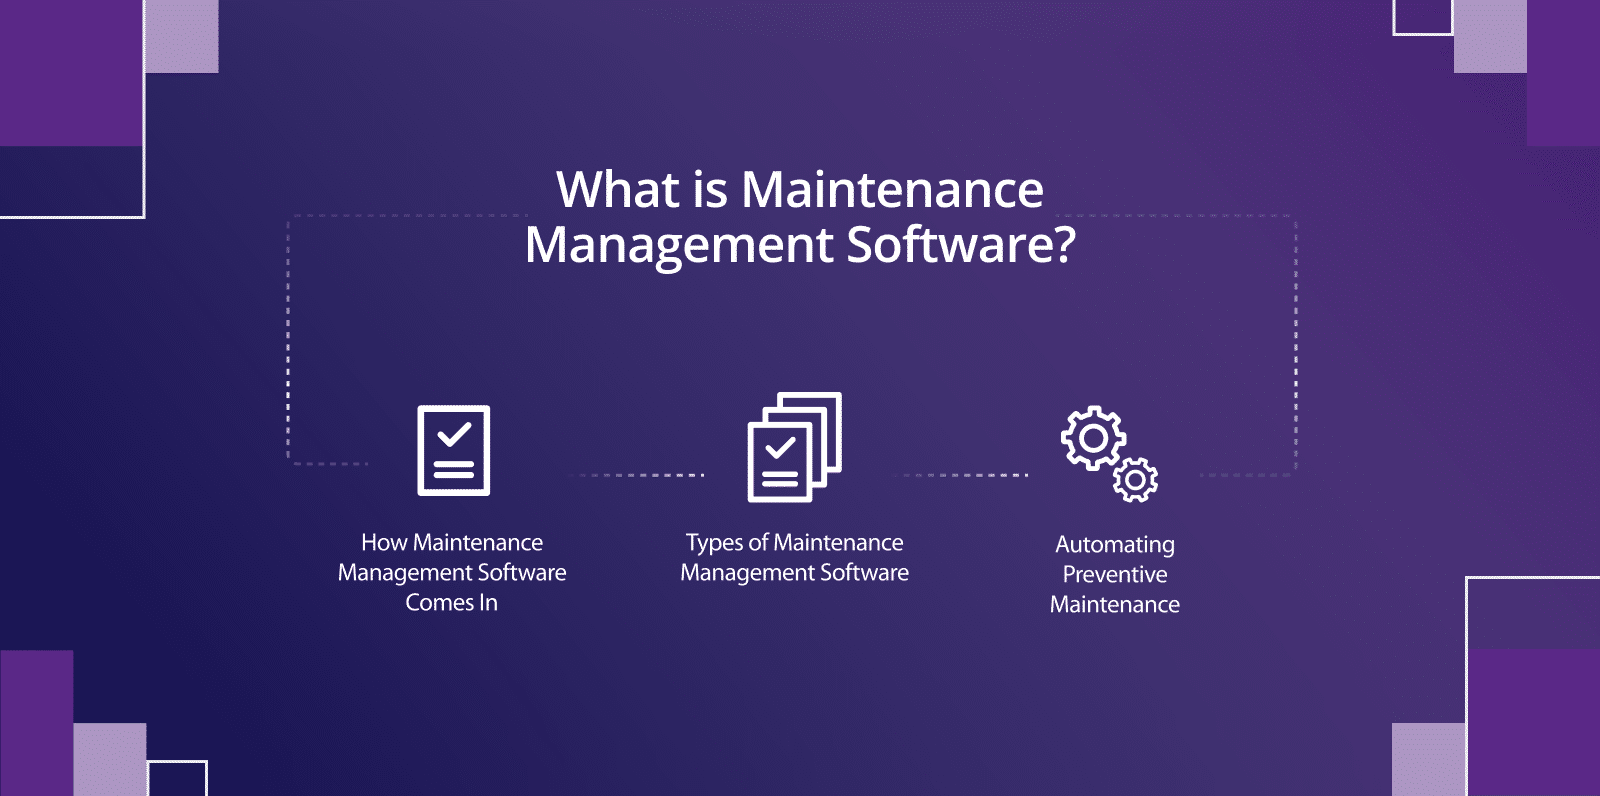 What is Maintenance Management Software